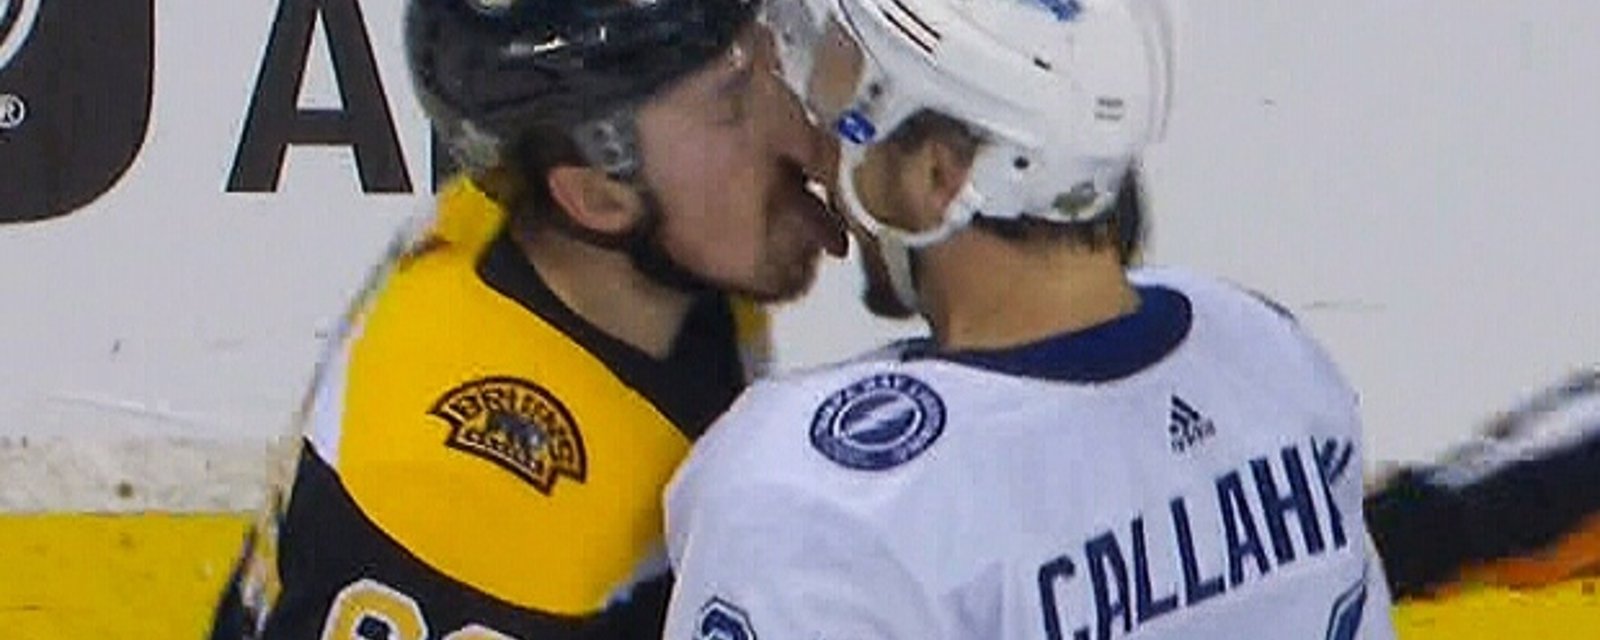 Marchand explains what pushed him to lick Callahan's face 